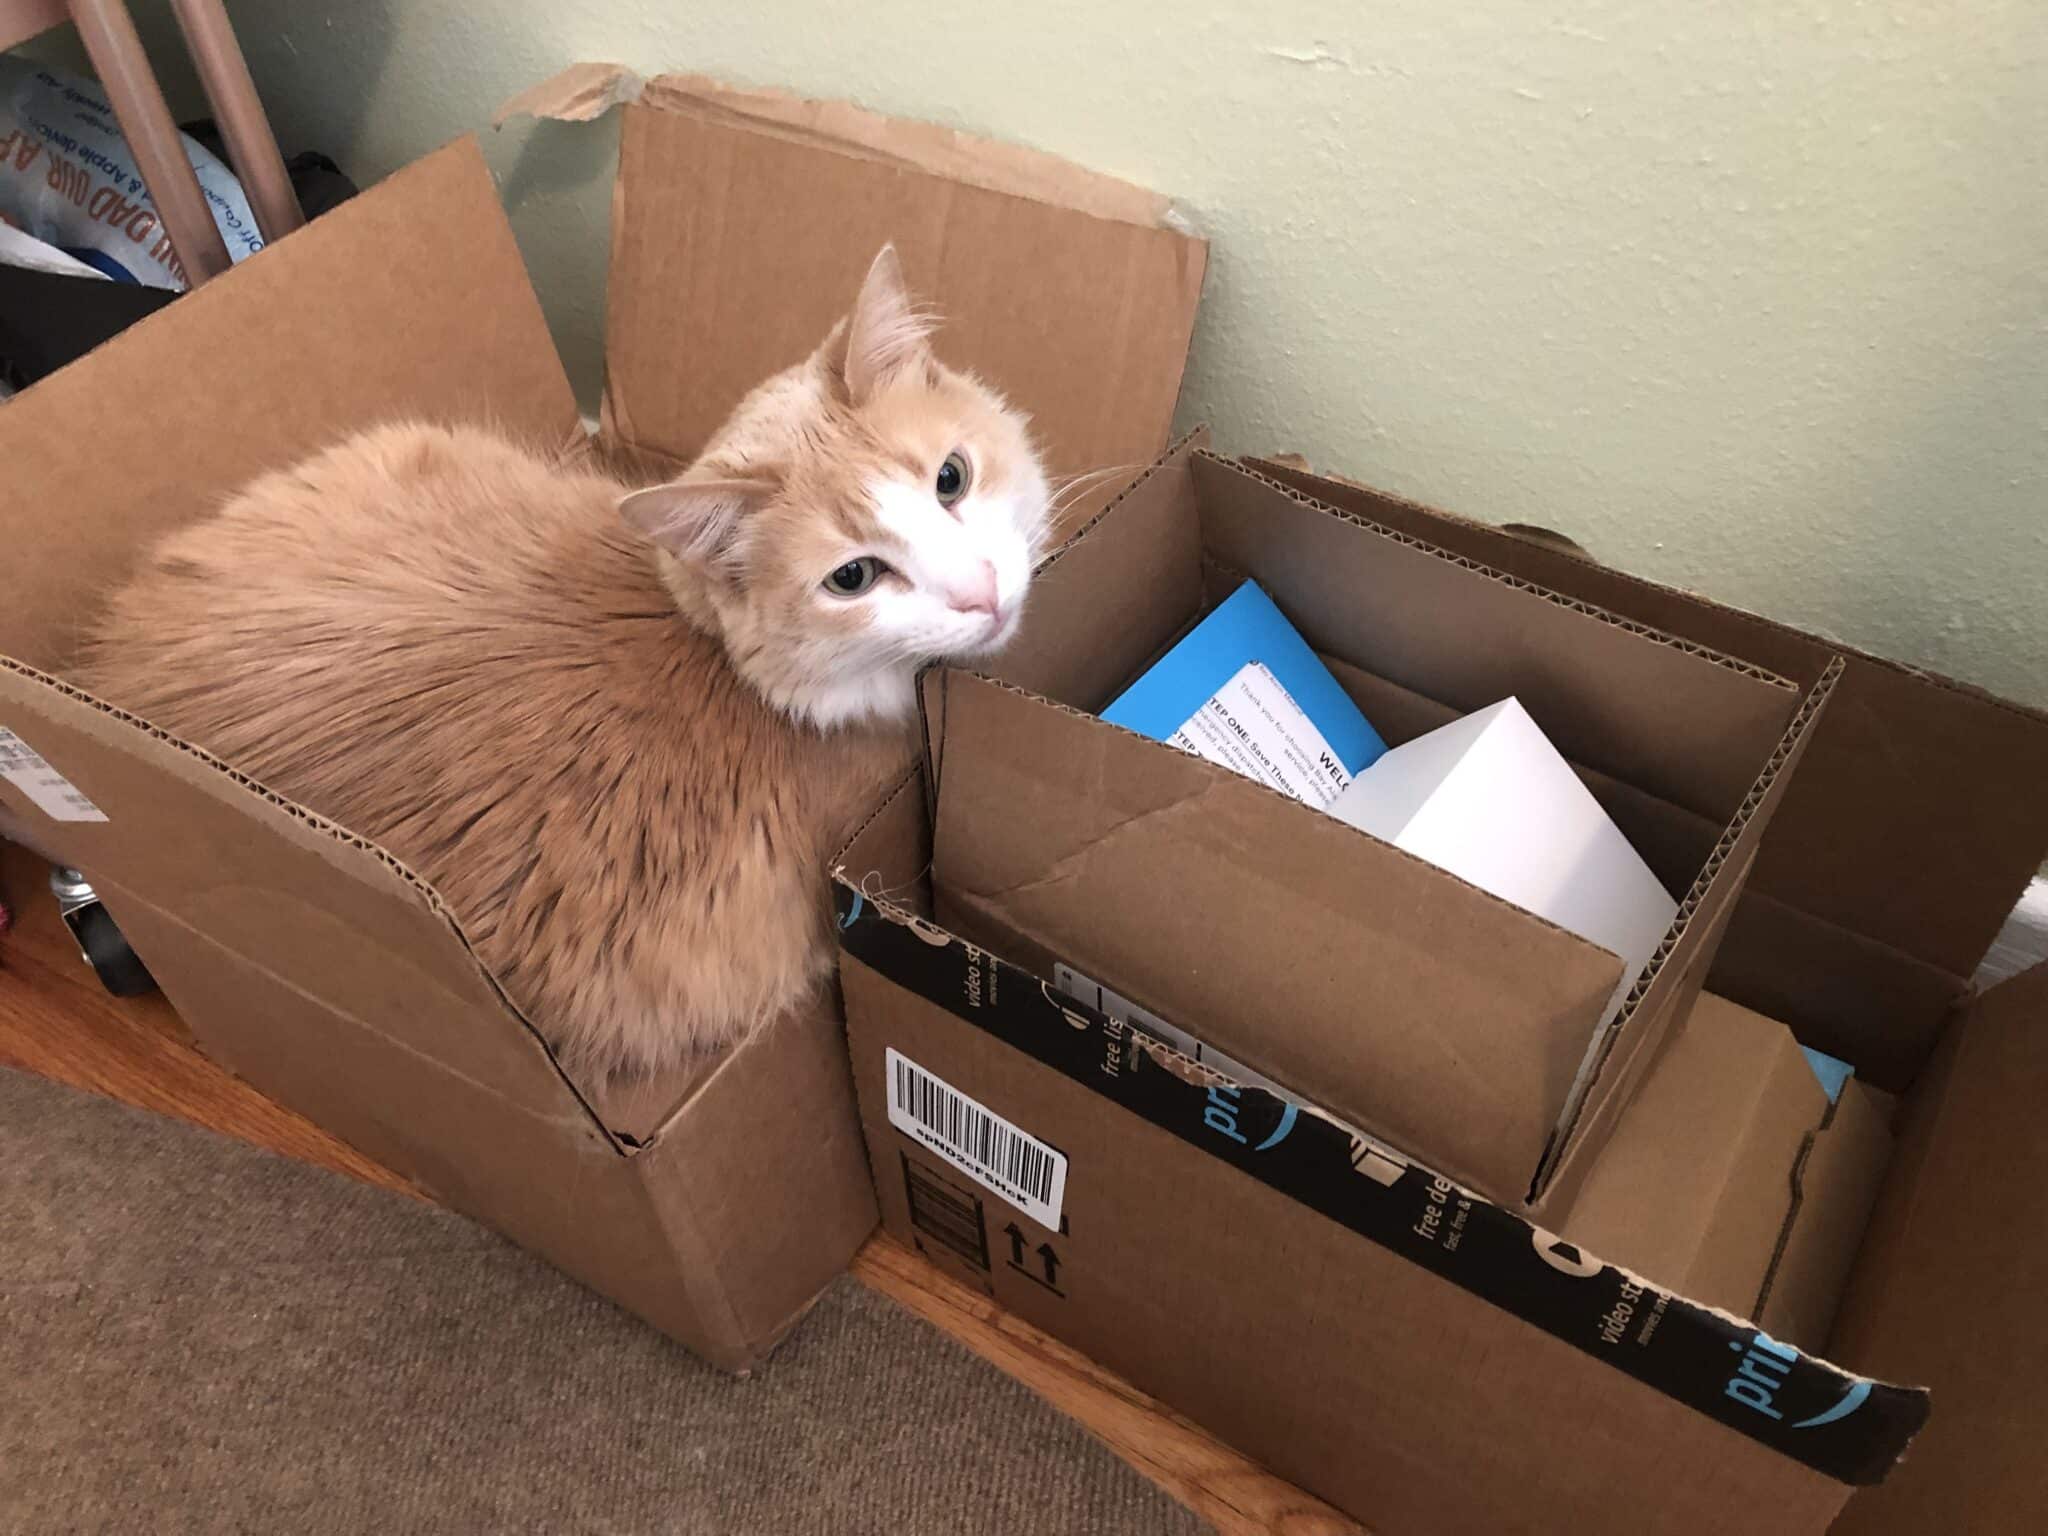 An orange cat in a medical alert system delivery box during testing.